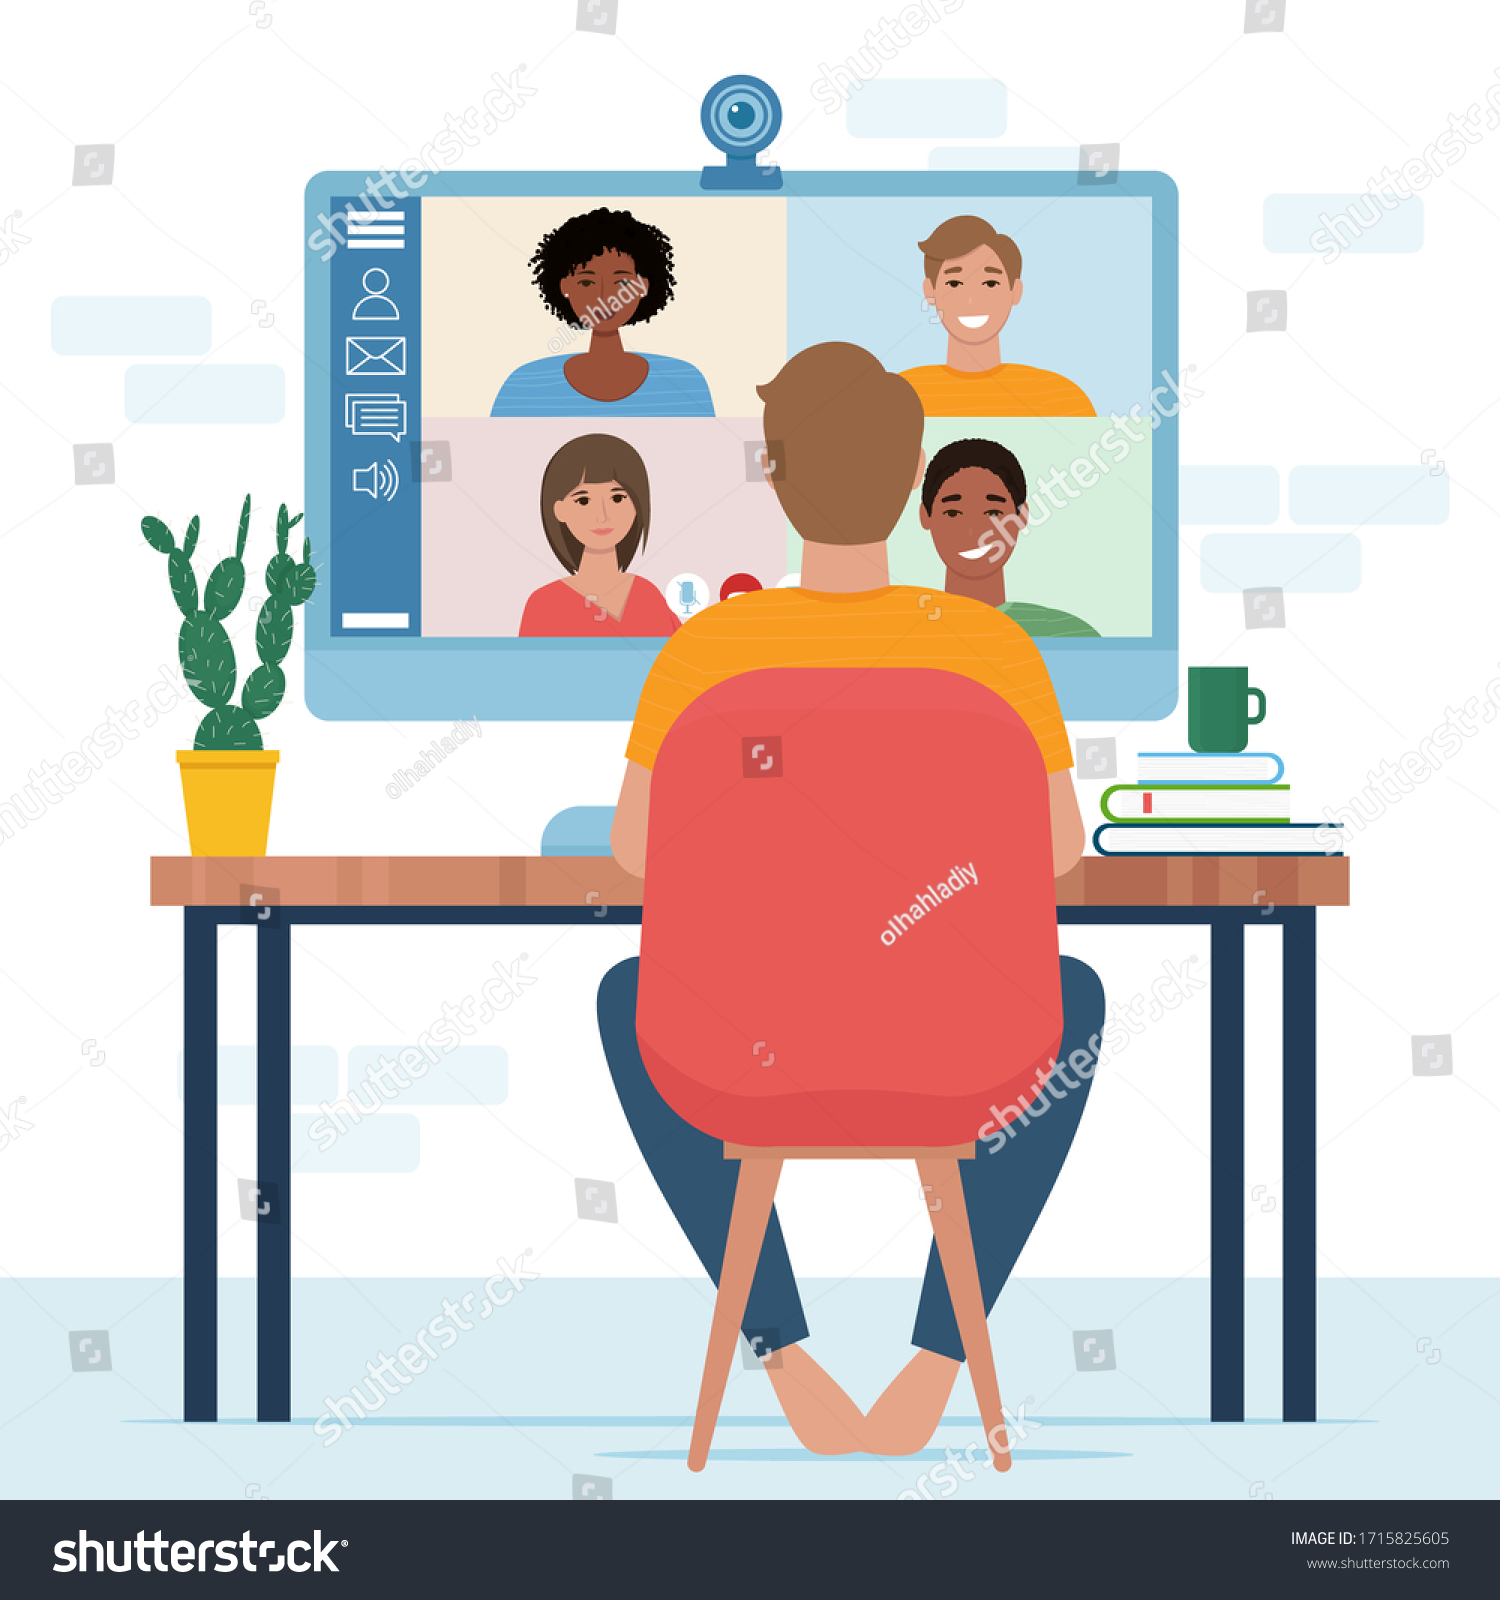 Video conference with people group. Computer screen. Man in video conference with colleagues. Home work concept. Friends talking on video. Vector illustration in flat style #1715825605